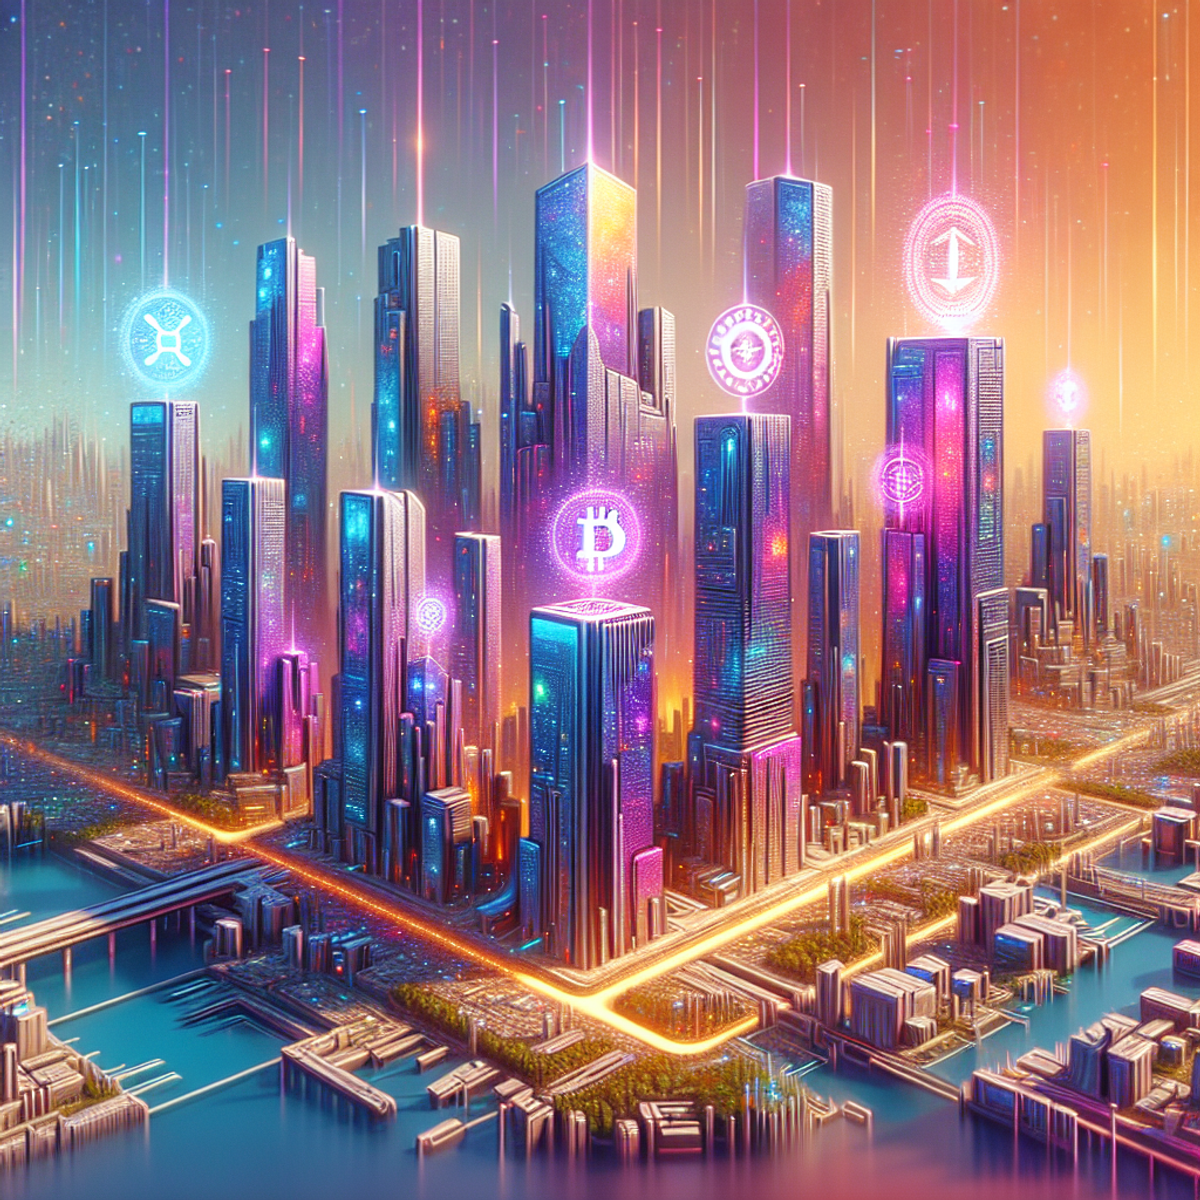 A futuristic cityscape with skyscrapers representing the top 10 virtual currencies, featuring vibrant colors, intricate architectural details, and surreal elements.